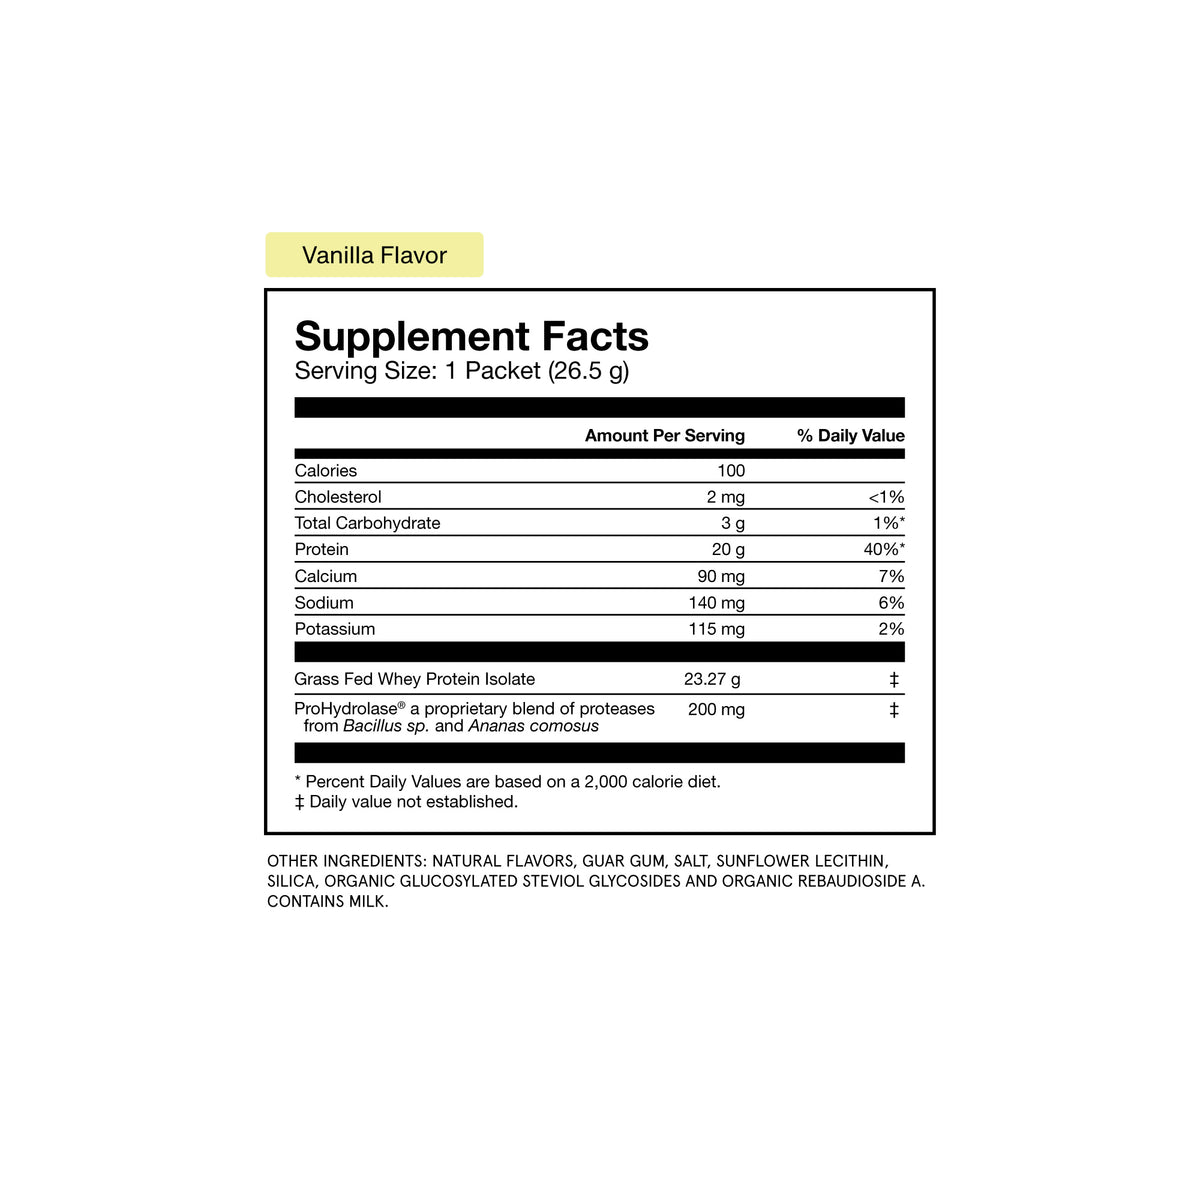 Vanilla Flavored Grass-Fed Whey Protein 14-Travel Packs Supplement Facts